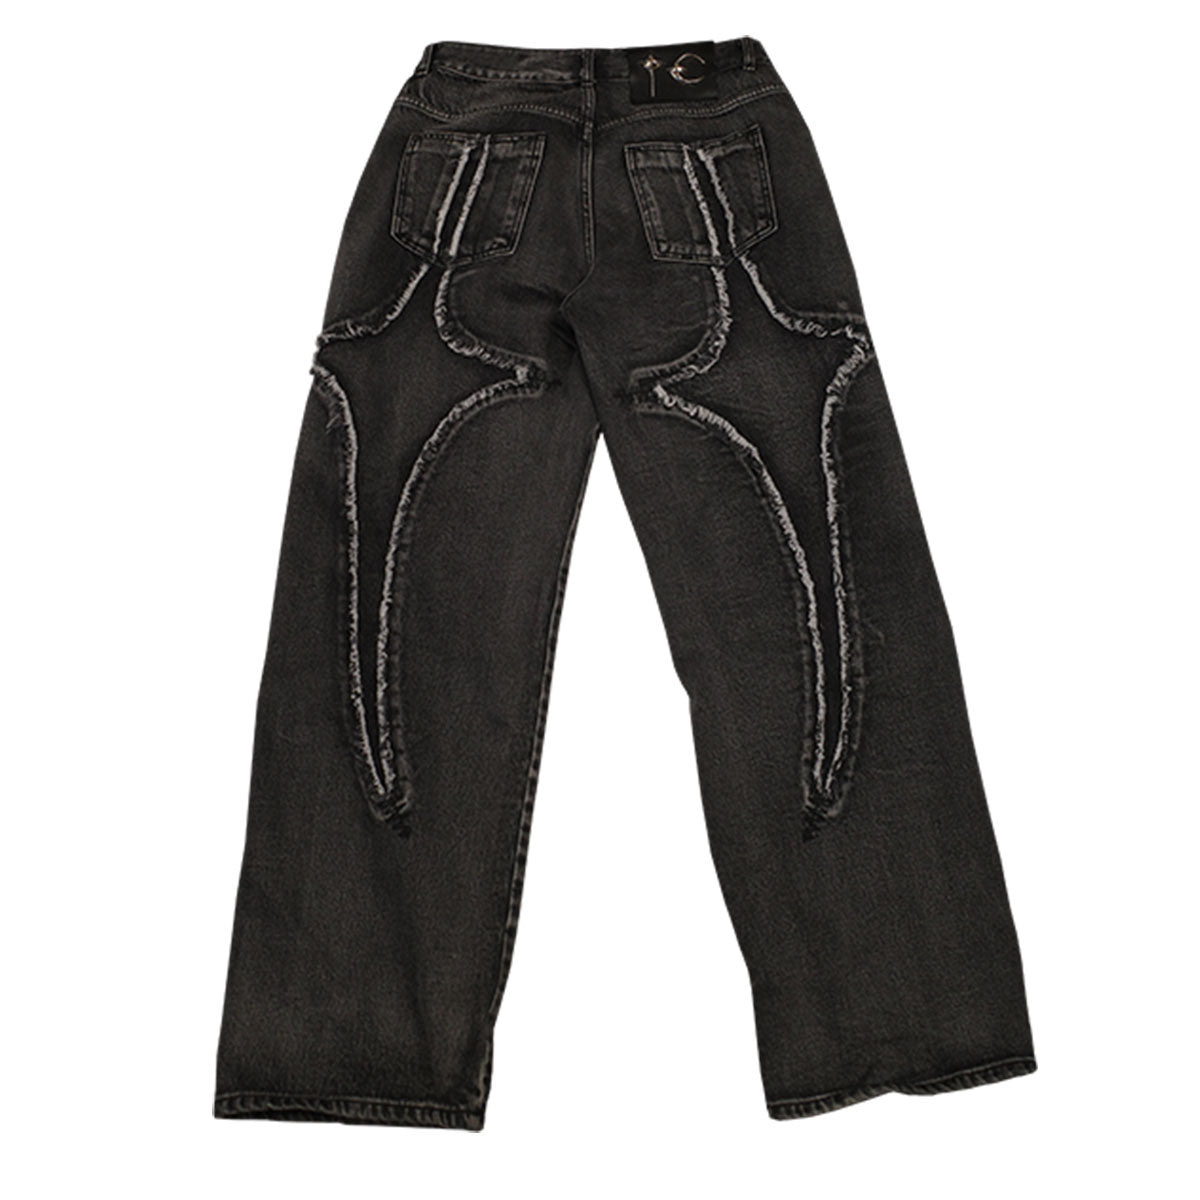 Tribal Denim Pant | Why are you here?